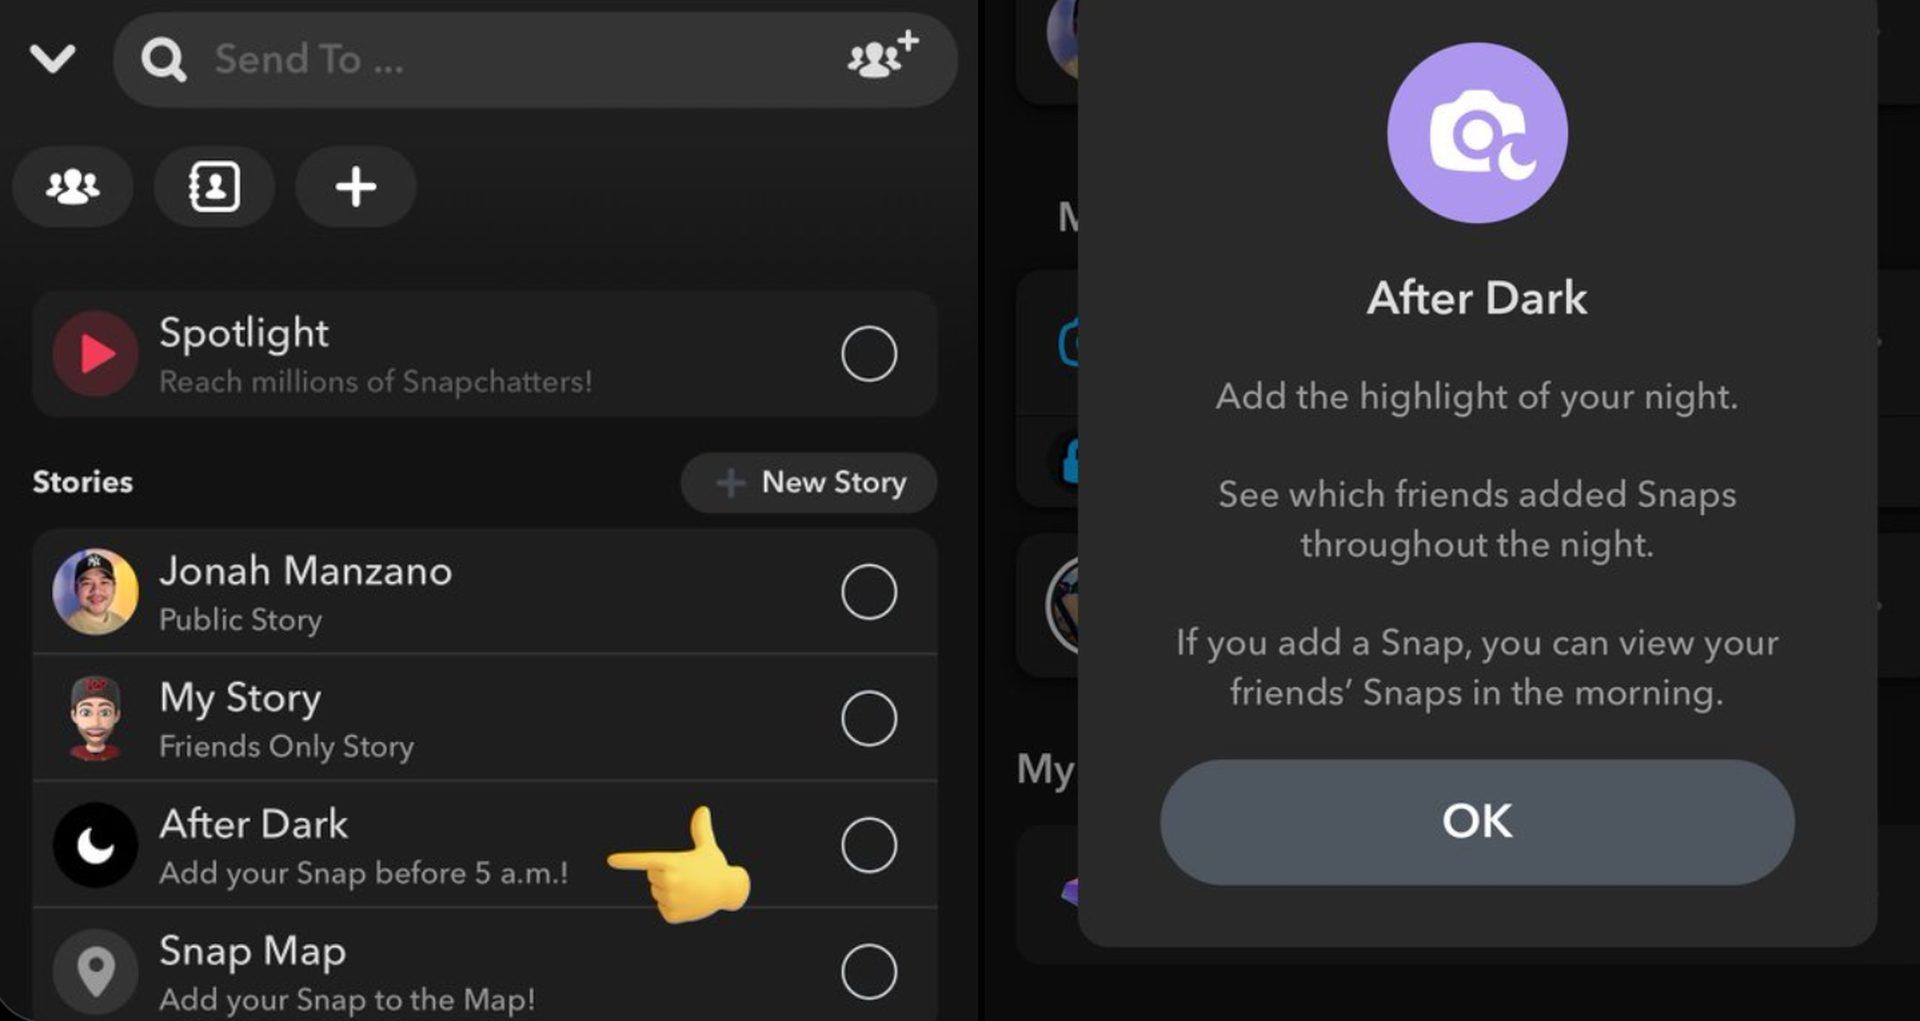 What is Snapchat After Dark? Learn how to post a Snapchat After Dark Snap and delete one. Keep reading and explore this BeReal-like feature!